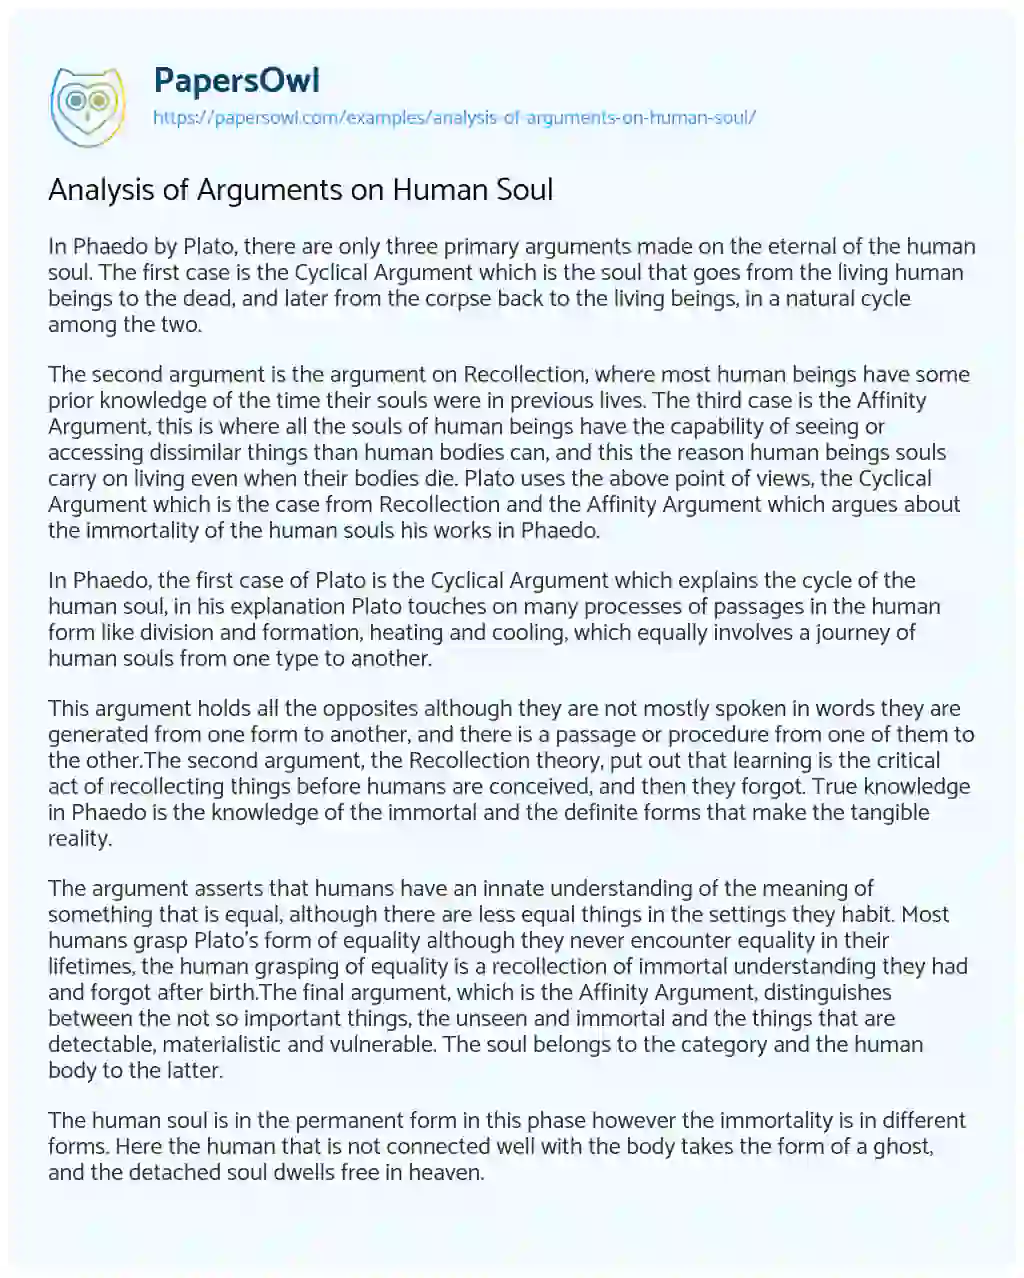 Essay on Analysis of Arguments on Human Soul